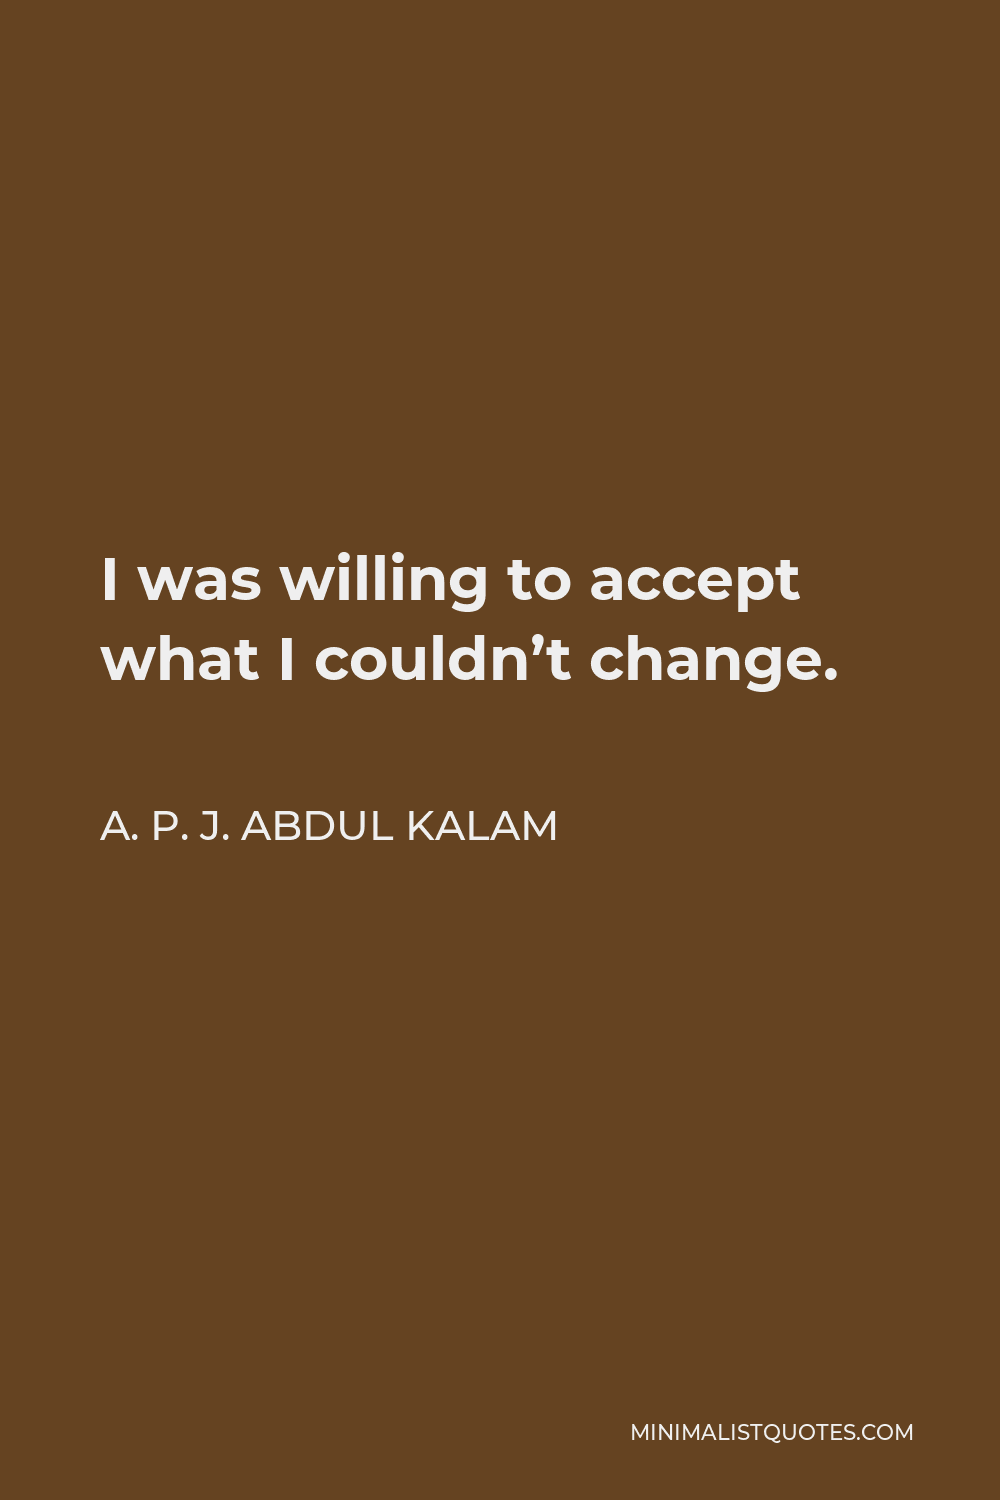 A. P. J. Abdul Kalam Quote - I was willing to accept what I couldn’t change.